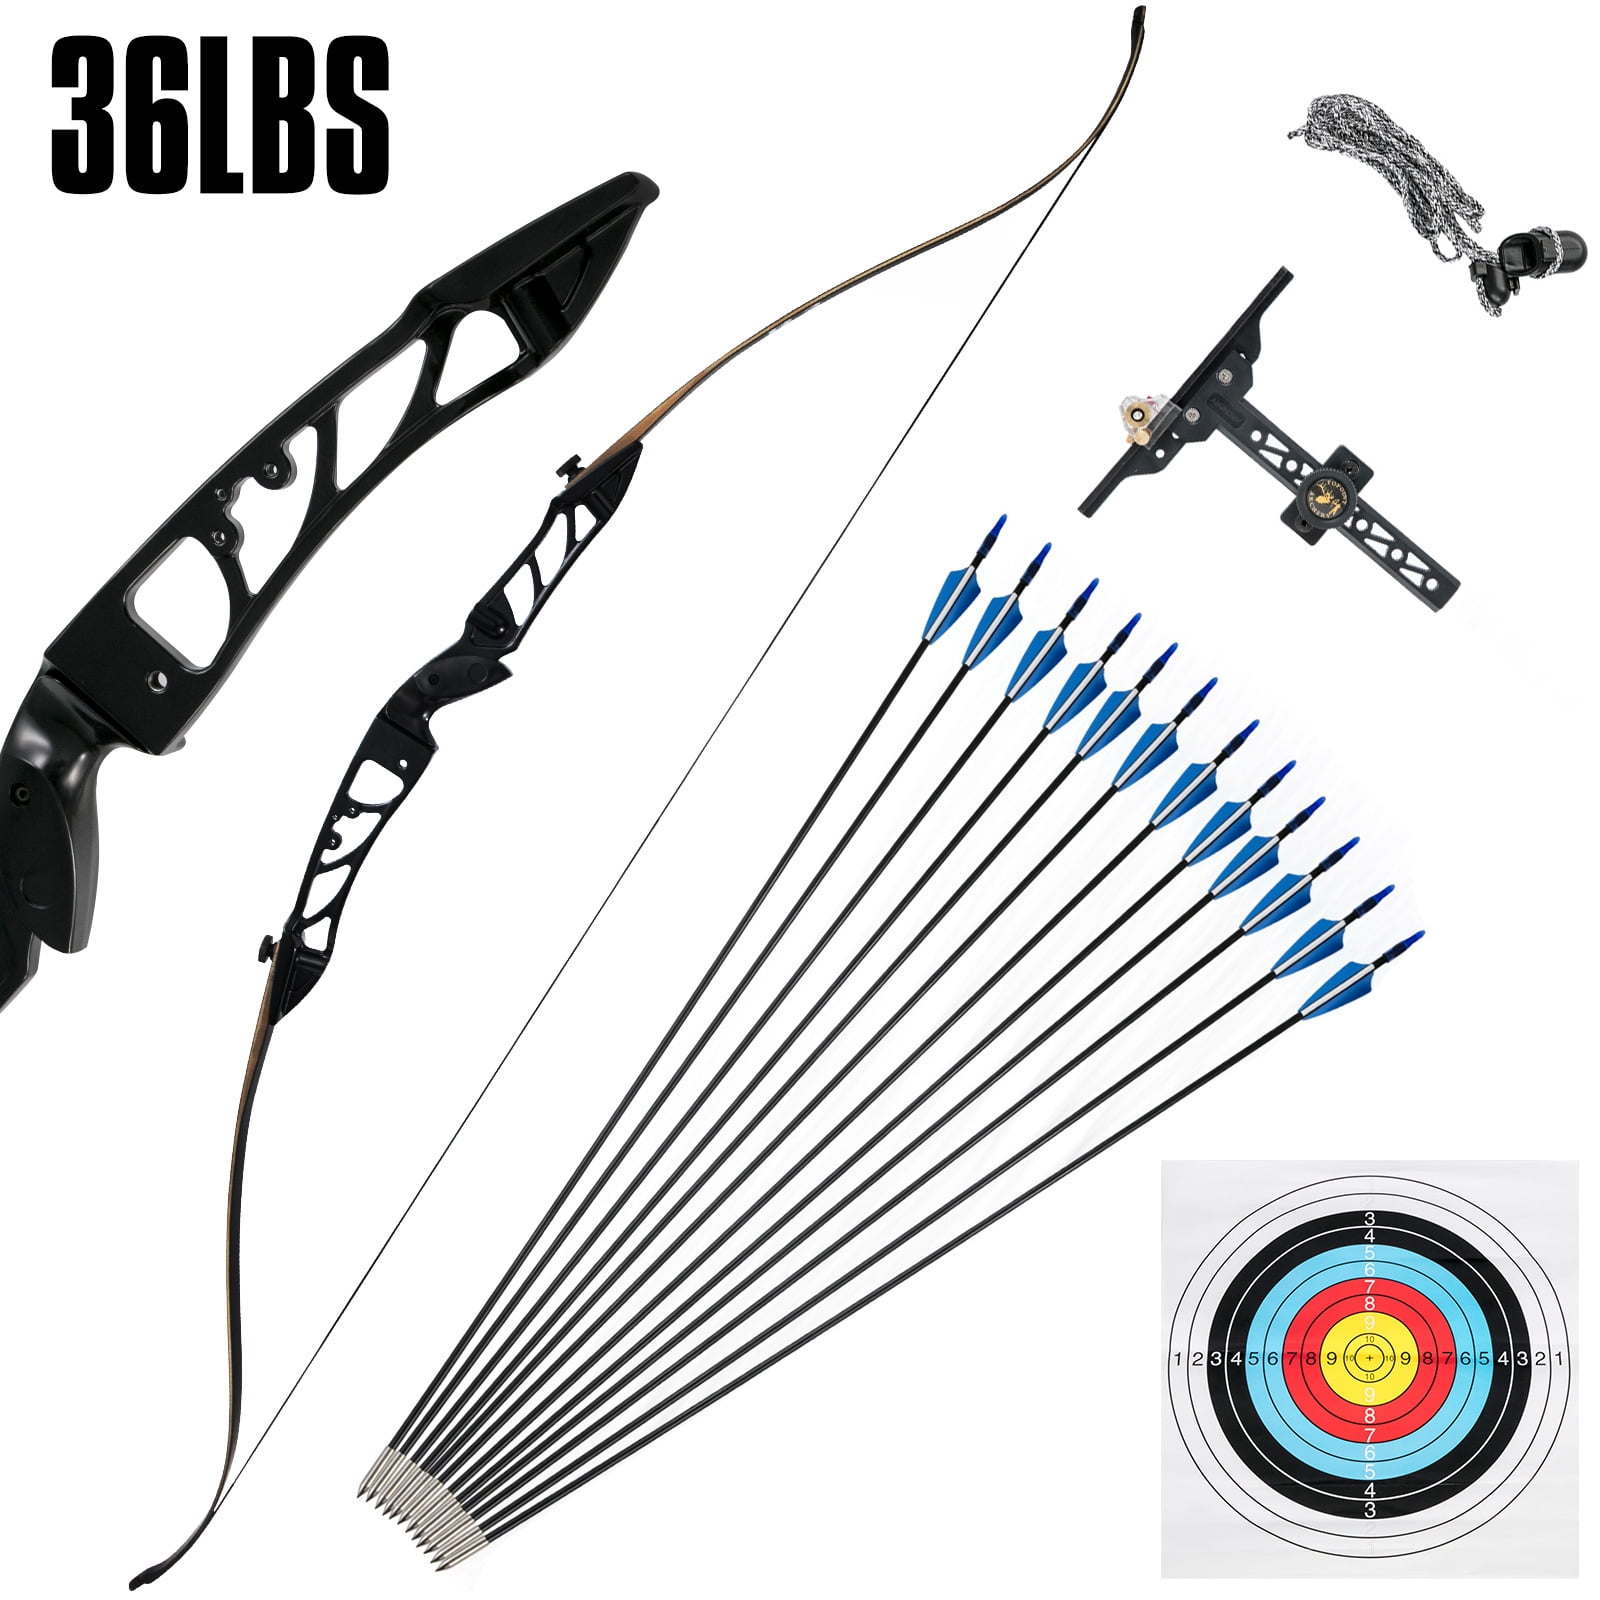 Archery Toy Bow Lightweight Traditional For Kids Beginners Practice Left-right 